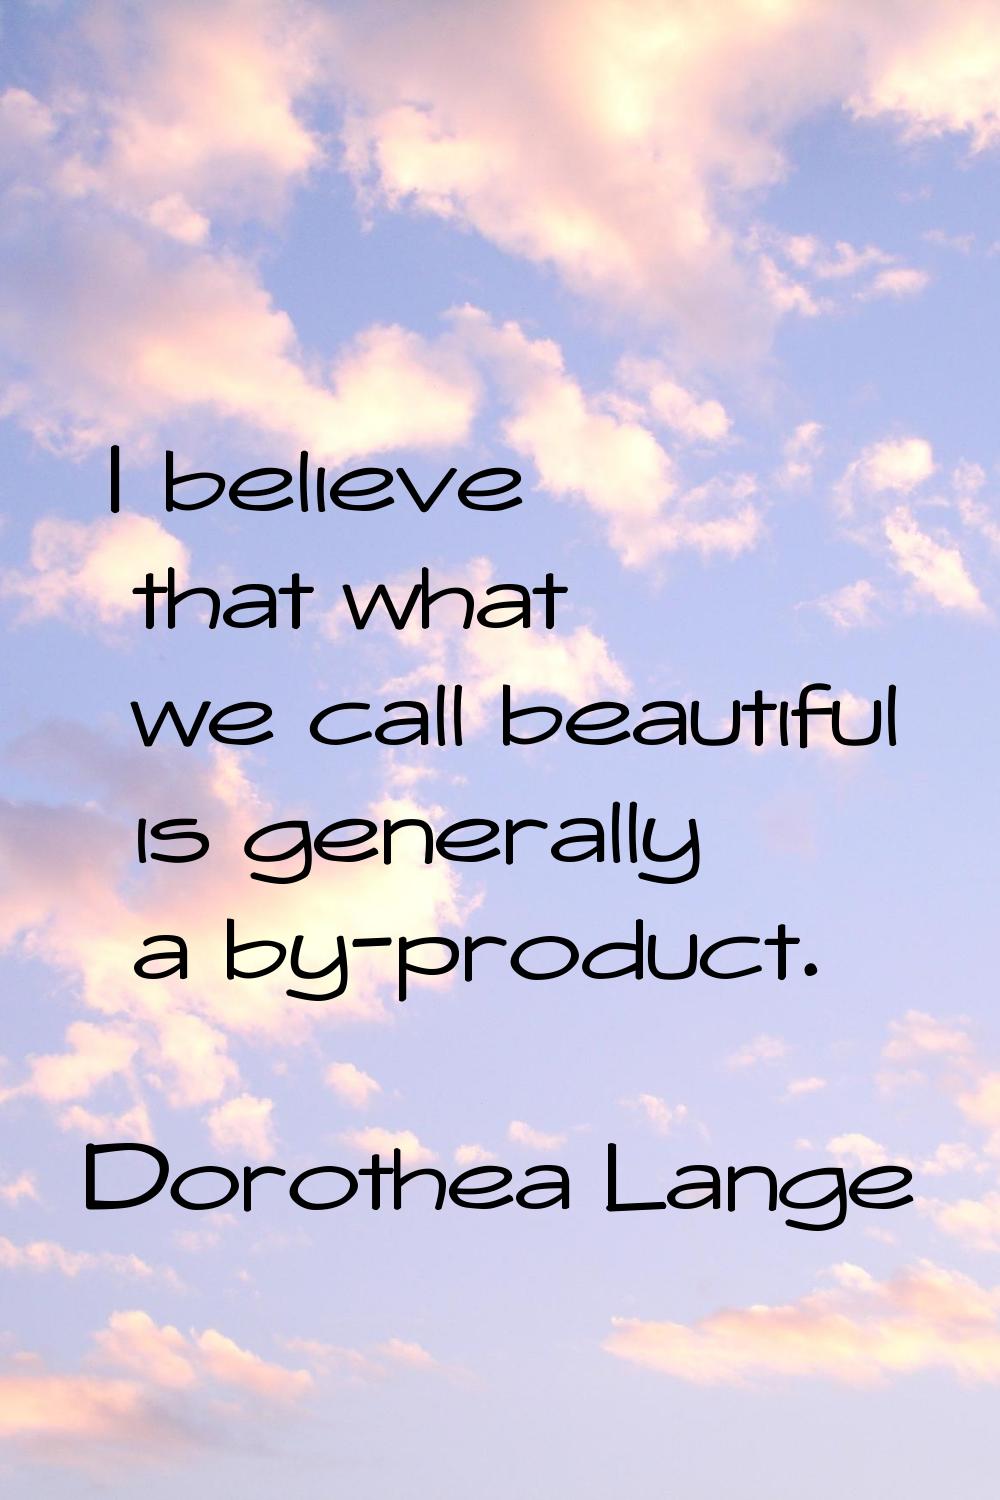 I believe that what we call beautiful is generally a by-product.